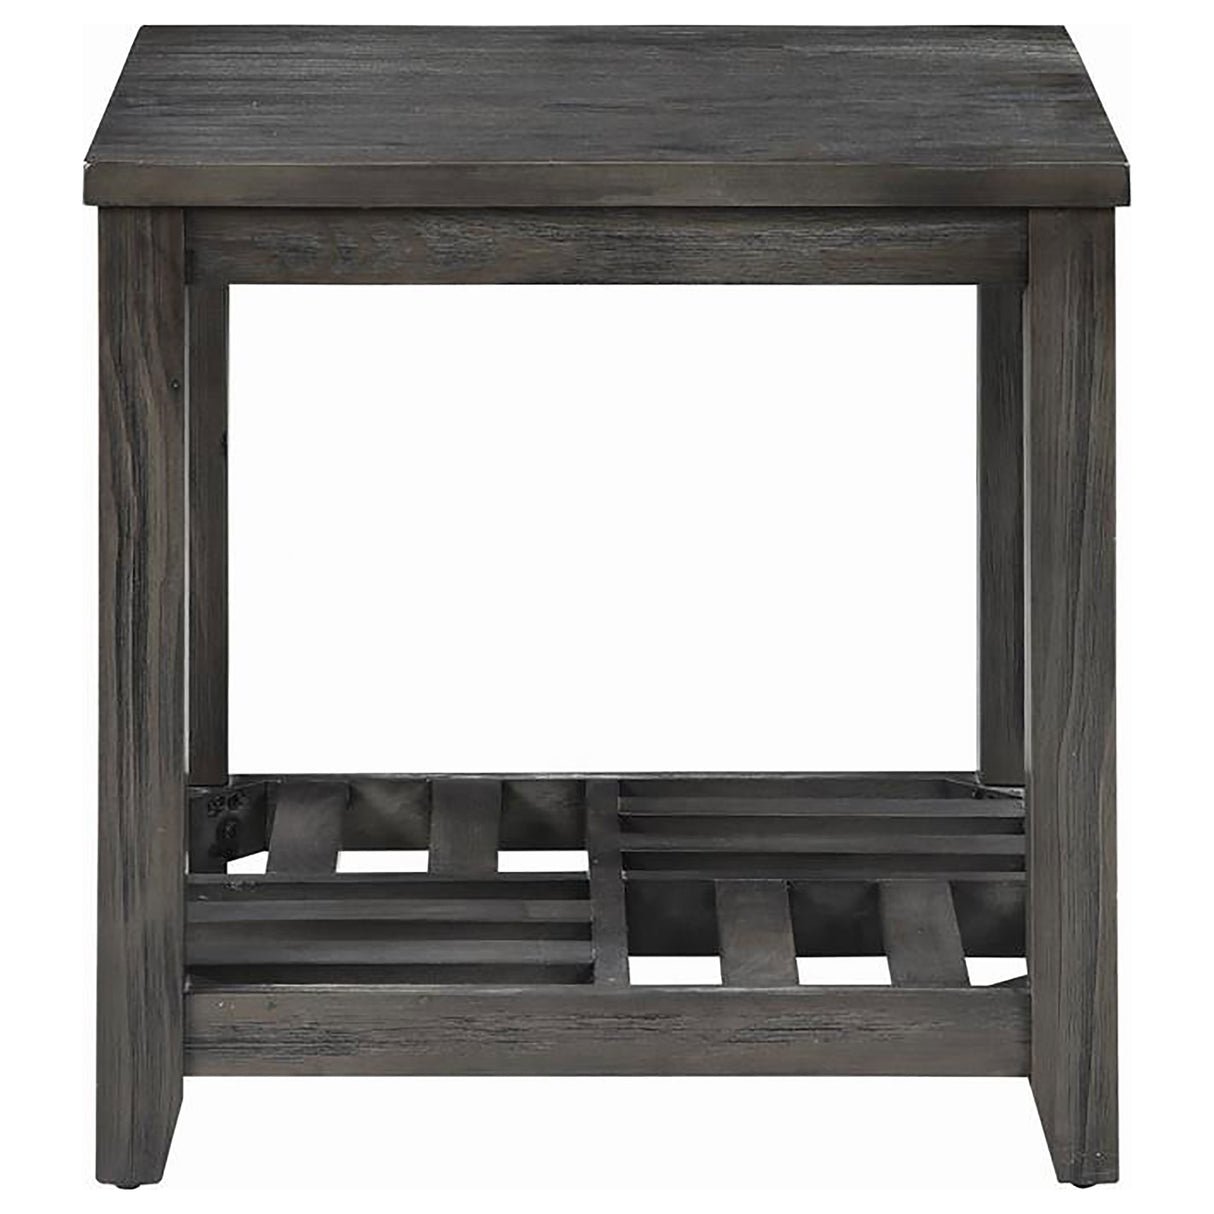 End Table - Cliffview 1-shelf Rectangular End Table Grey